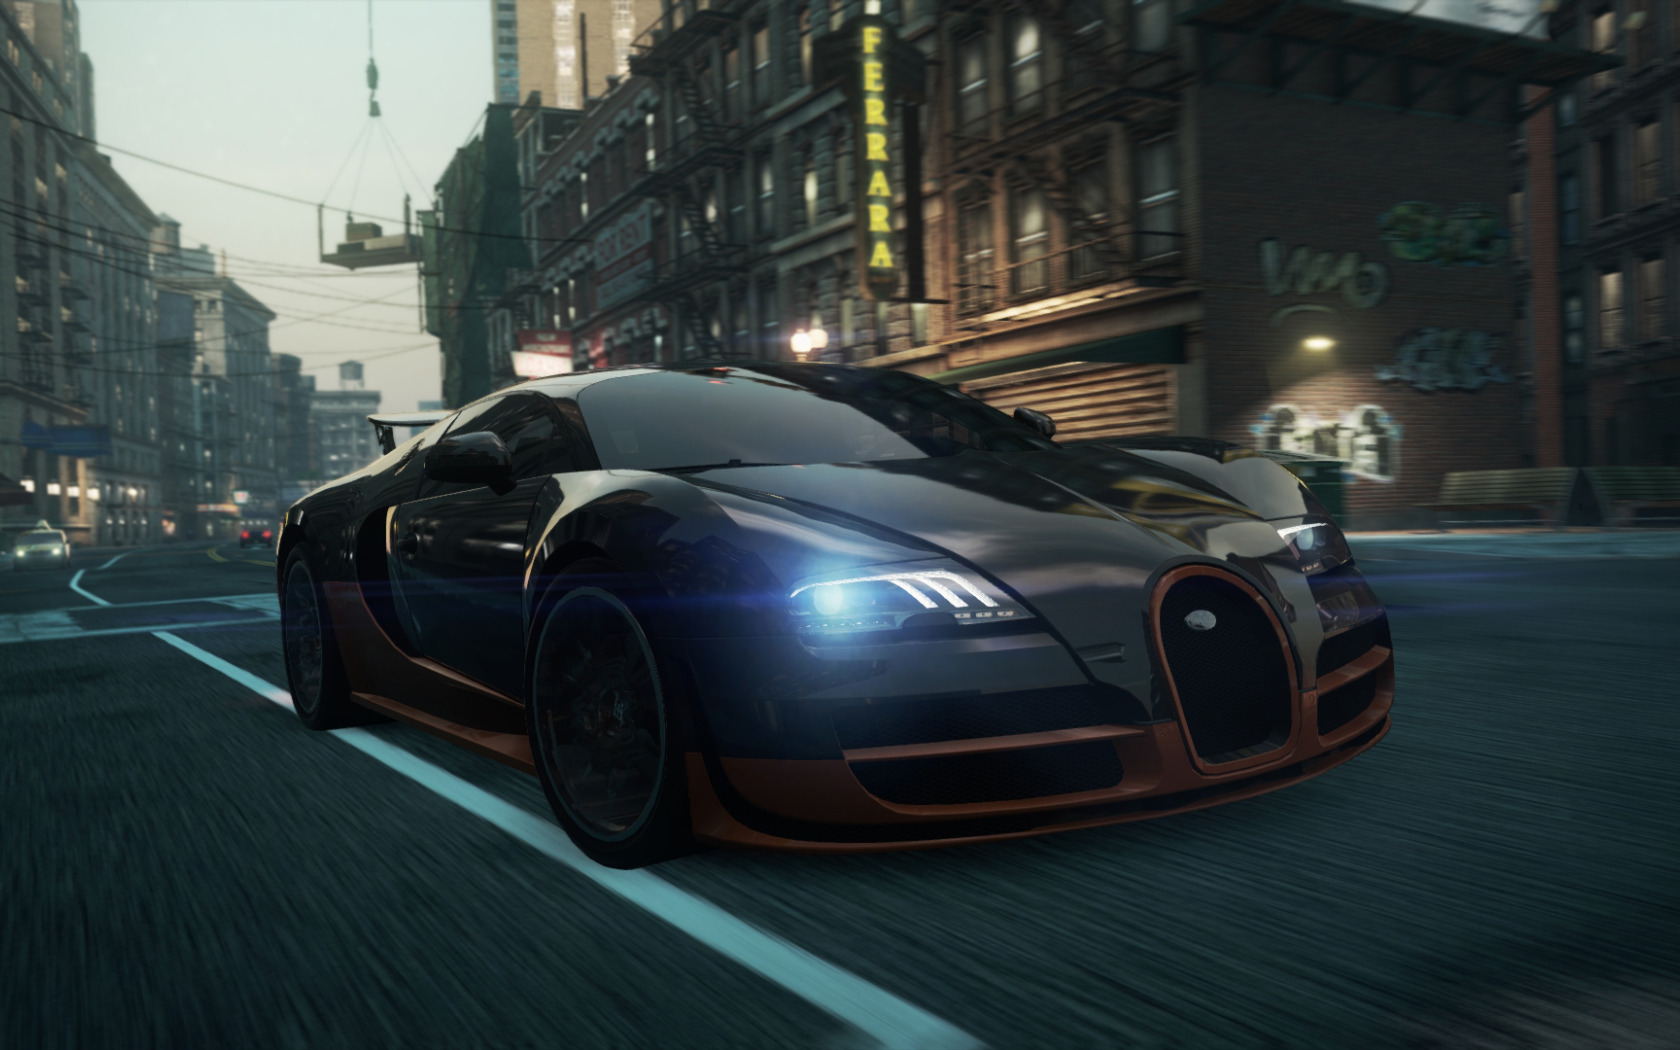 Need for speed wanted game. Need for Speed most wanted 2012. Бугатти Вейрон в most wanted 2012. Нед фор СПИД мост вантед 2012. Need for Speed most wanted 2012 Bugatti Veyron super Sport.